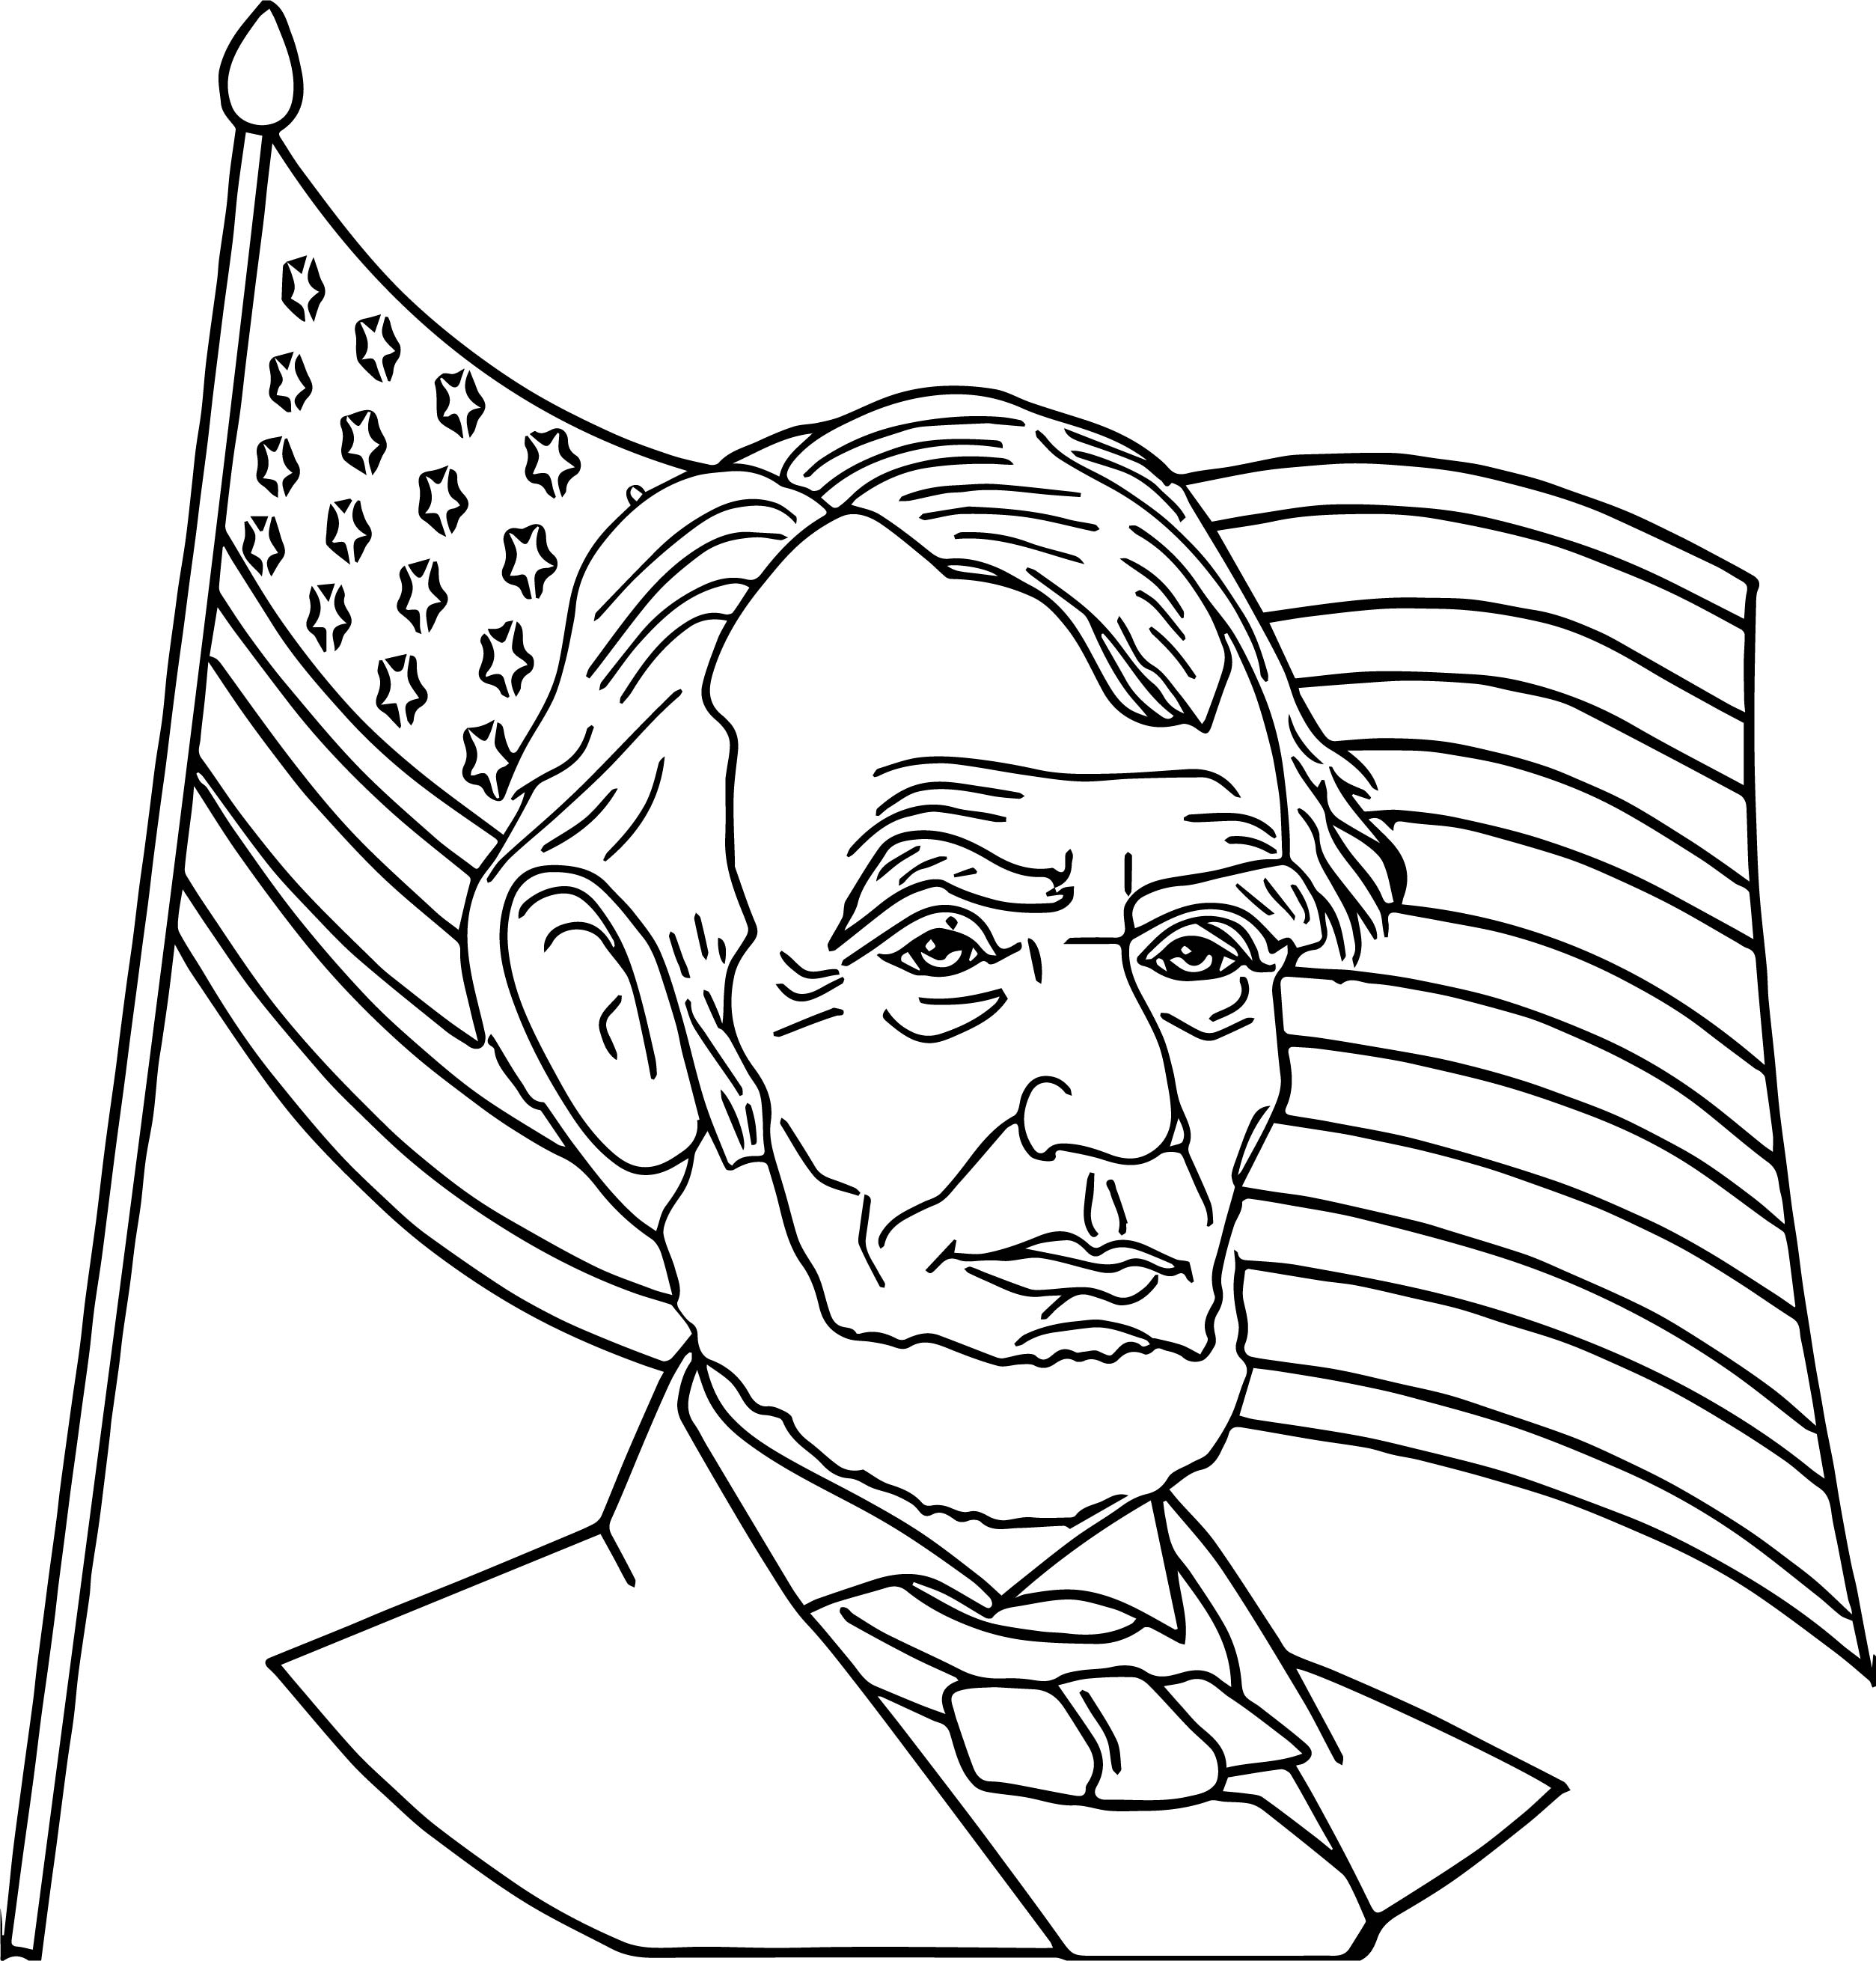 Lincoln Coloring Page at GetColorings.com | Free printable colorings